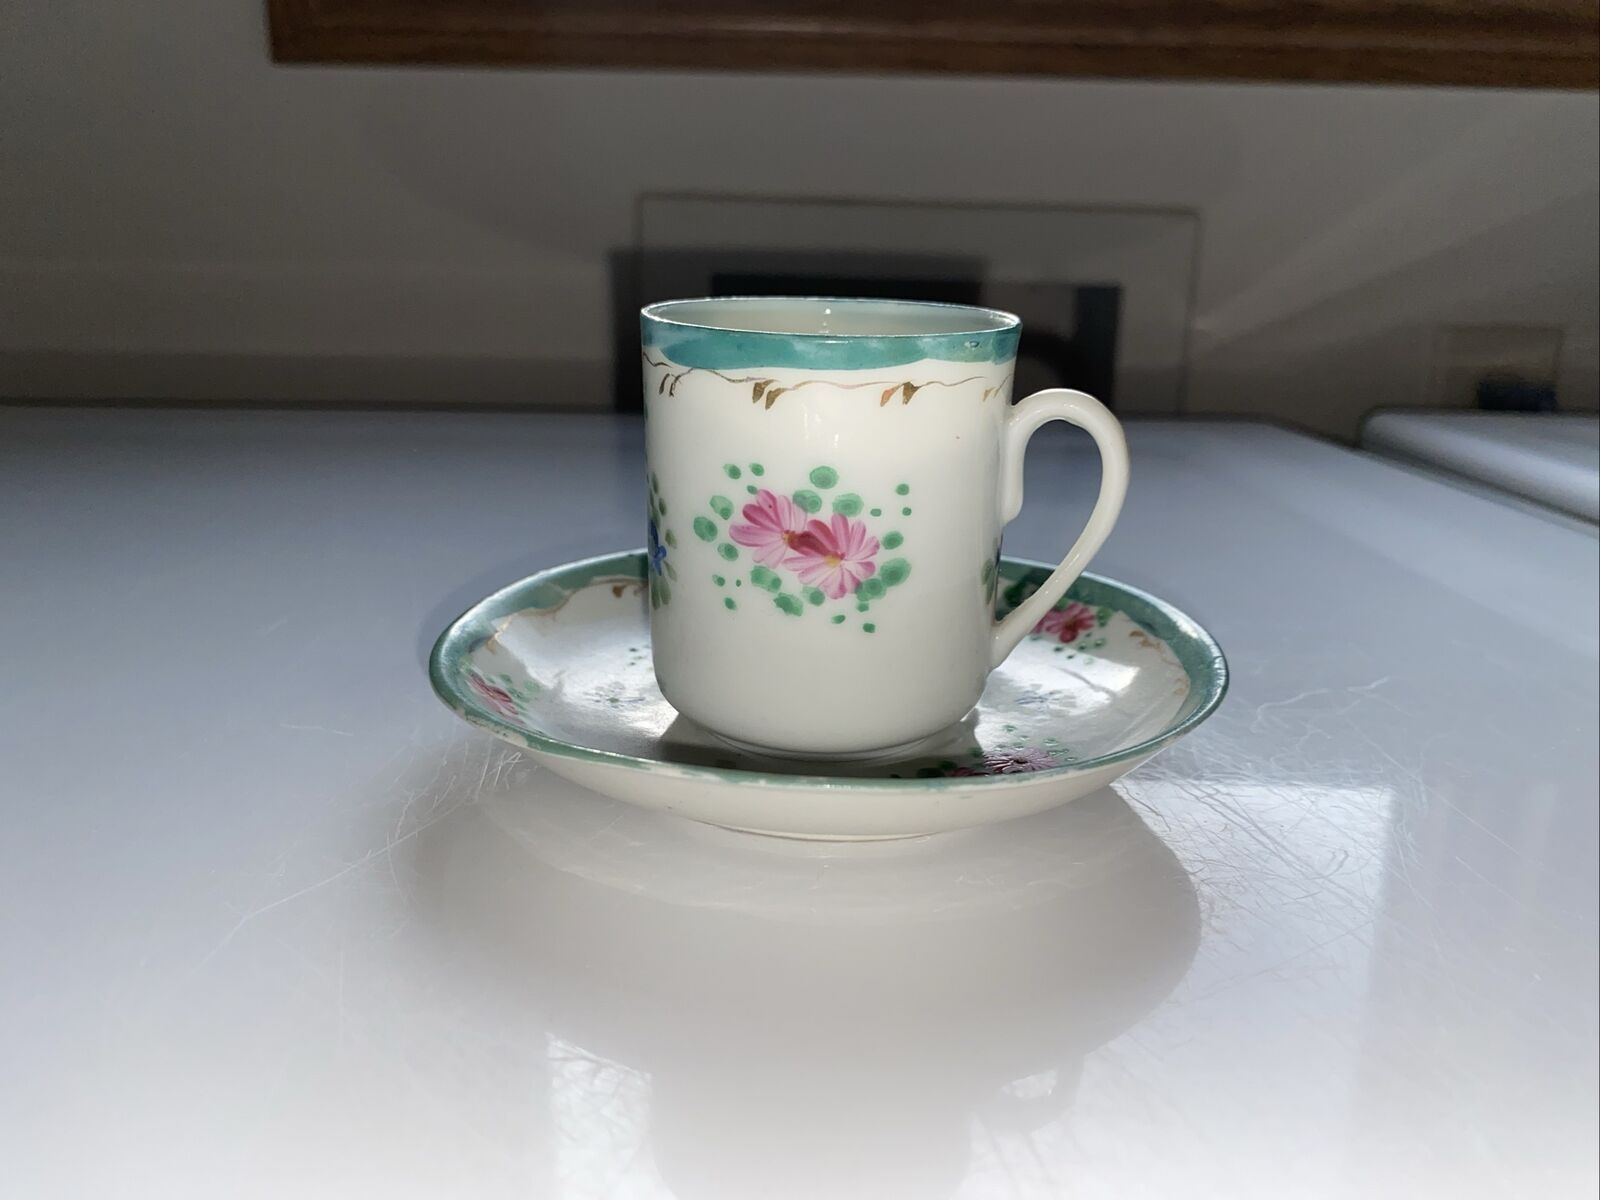 Vintage Hand Painted Multicolor Floral Demitasse Cup, Saucer Made Of Bone China